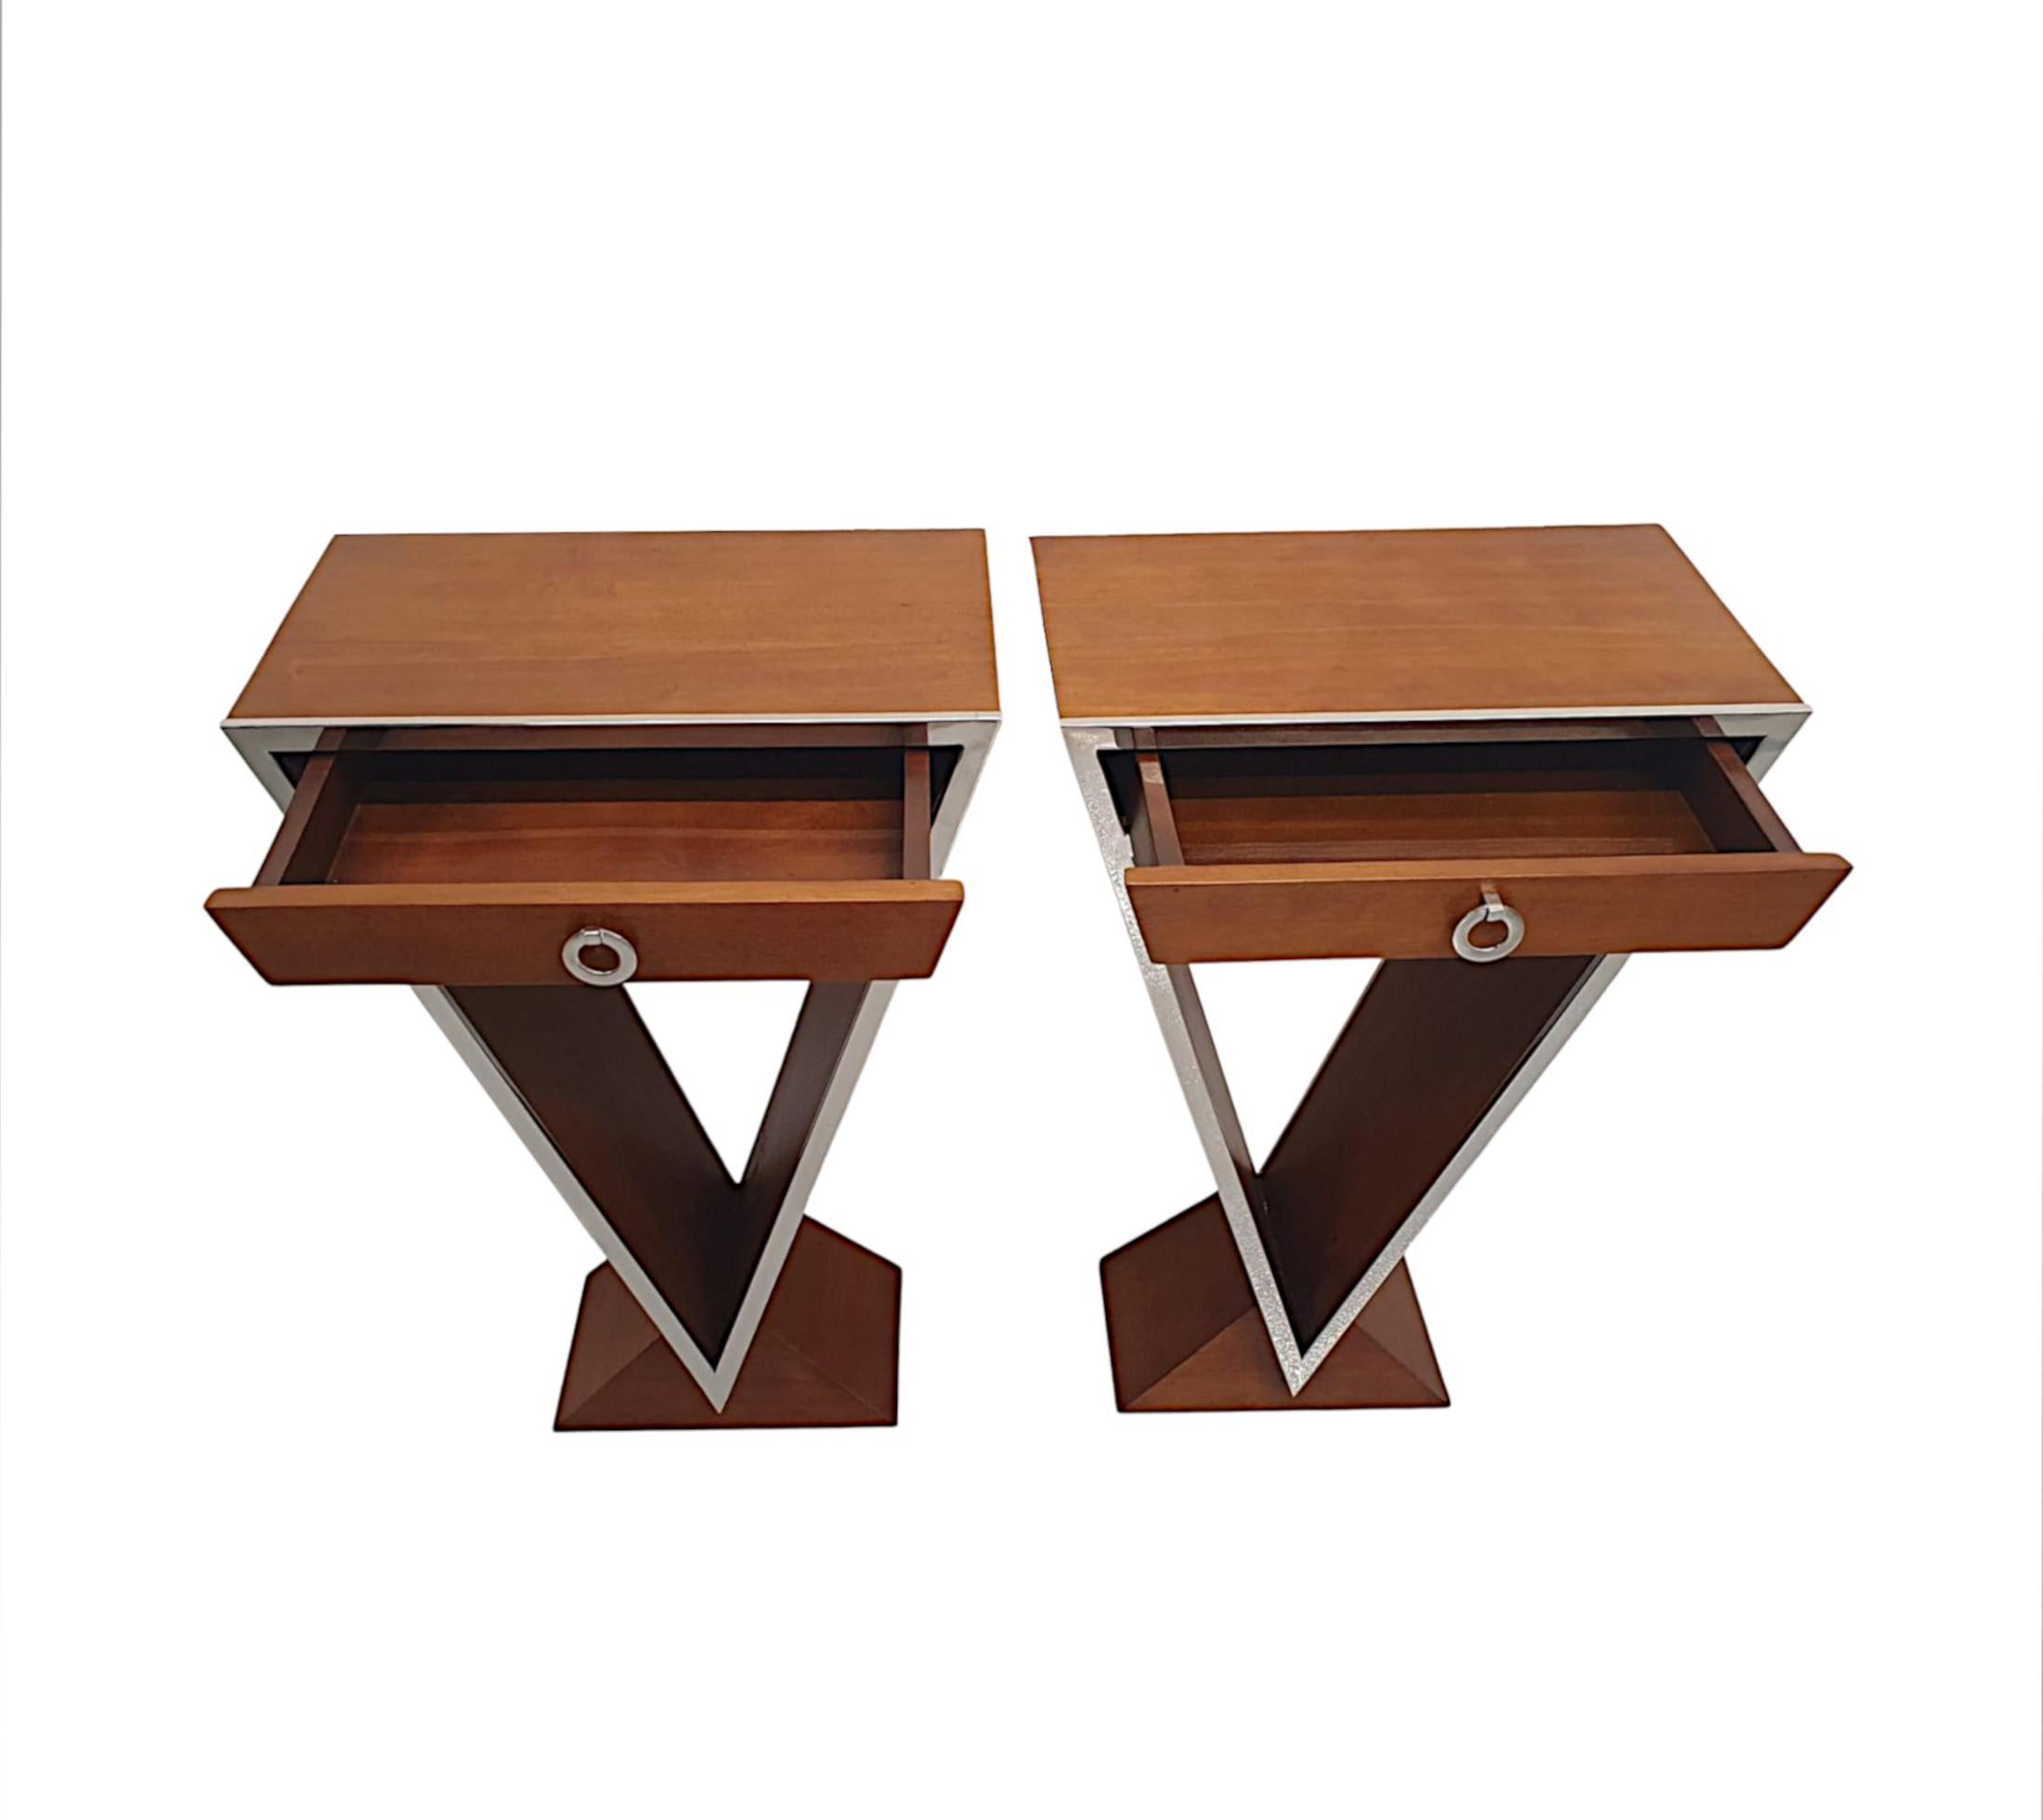 French  A Stunning Pair of Cherrywood and Chrome Side Tables in the Art Deco Style For Sale